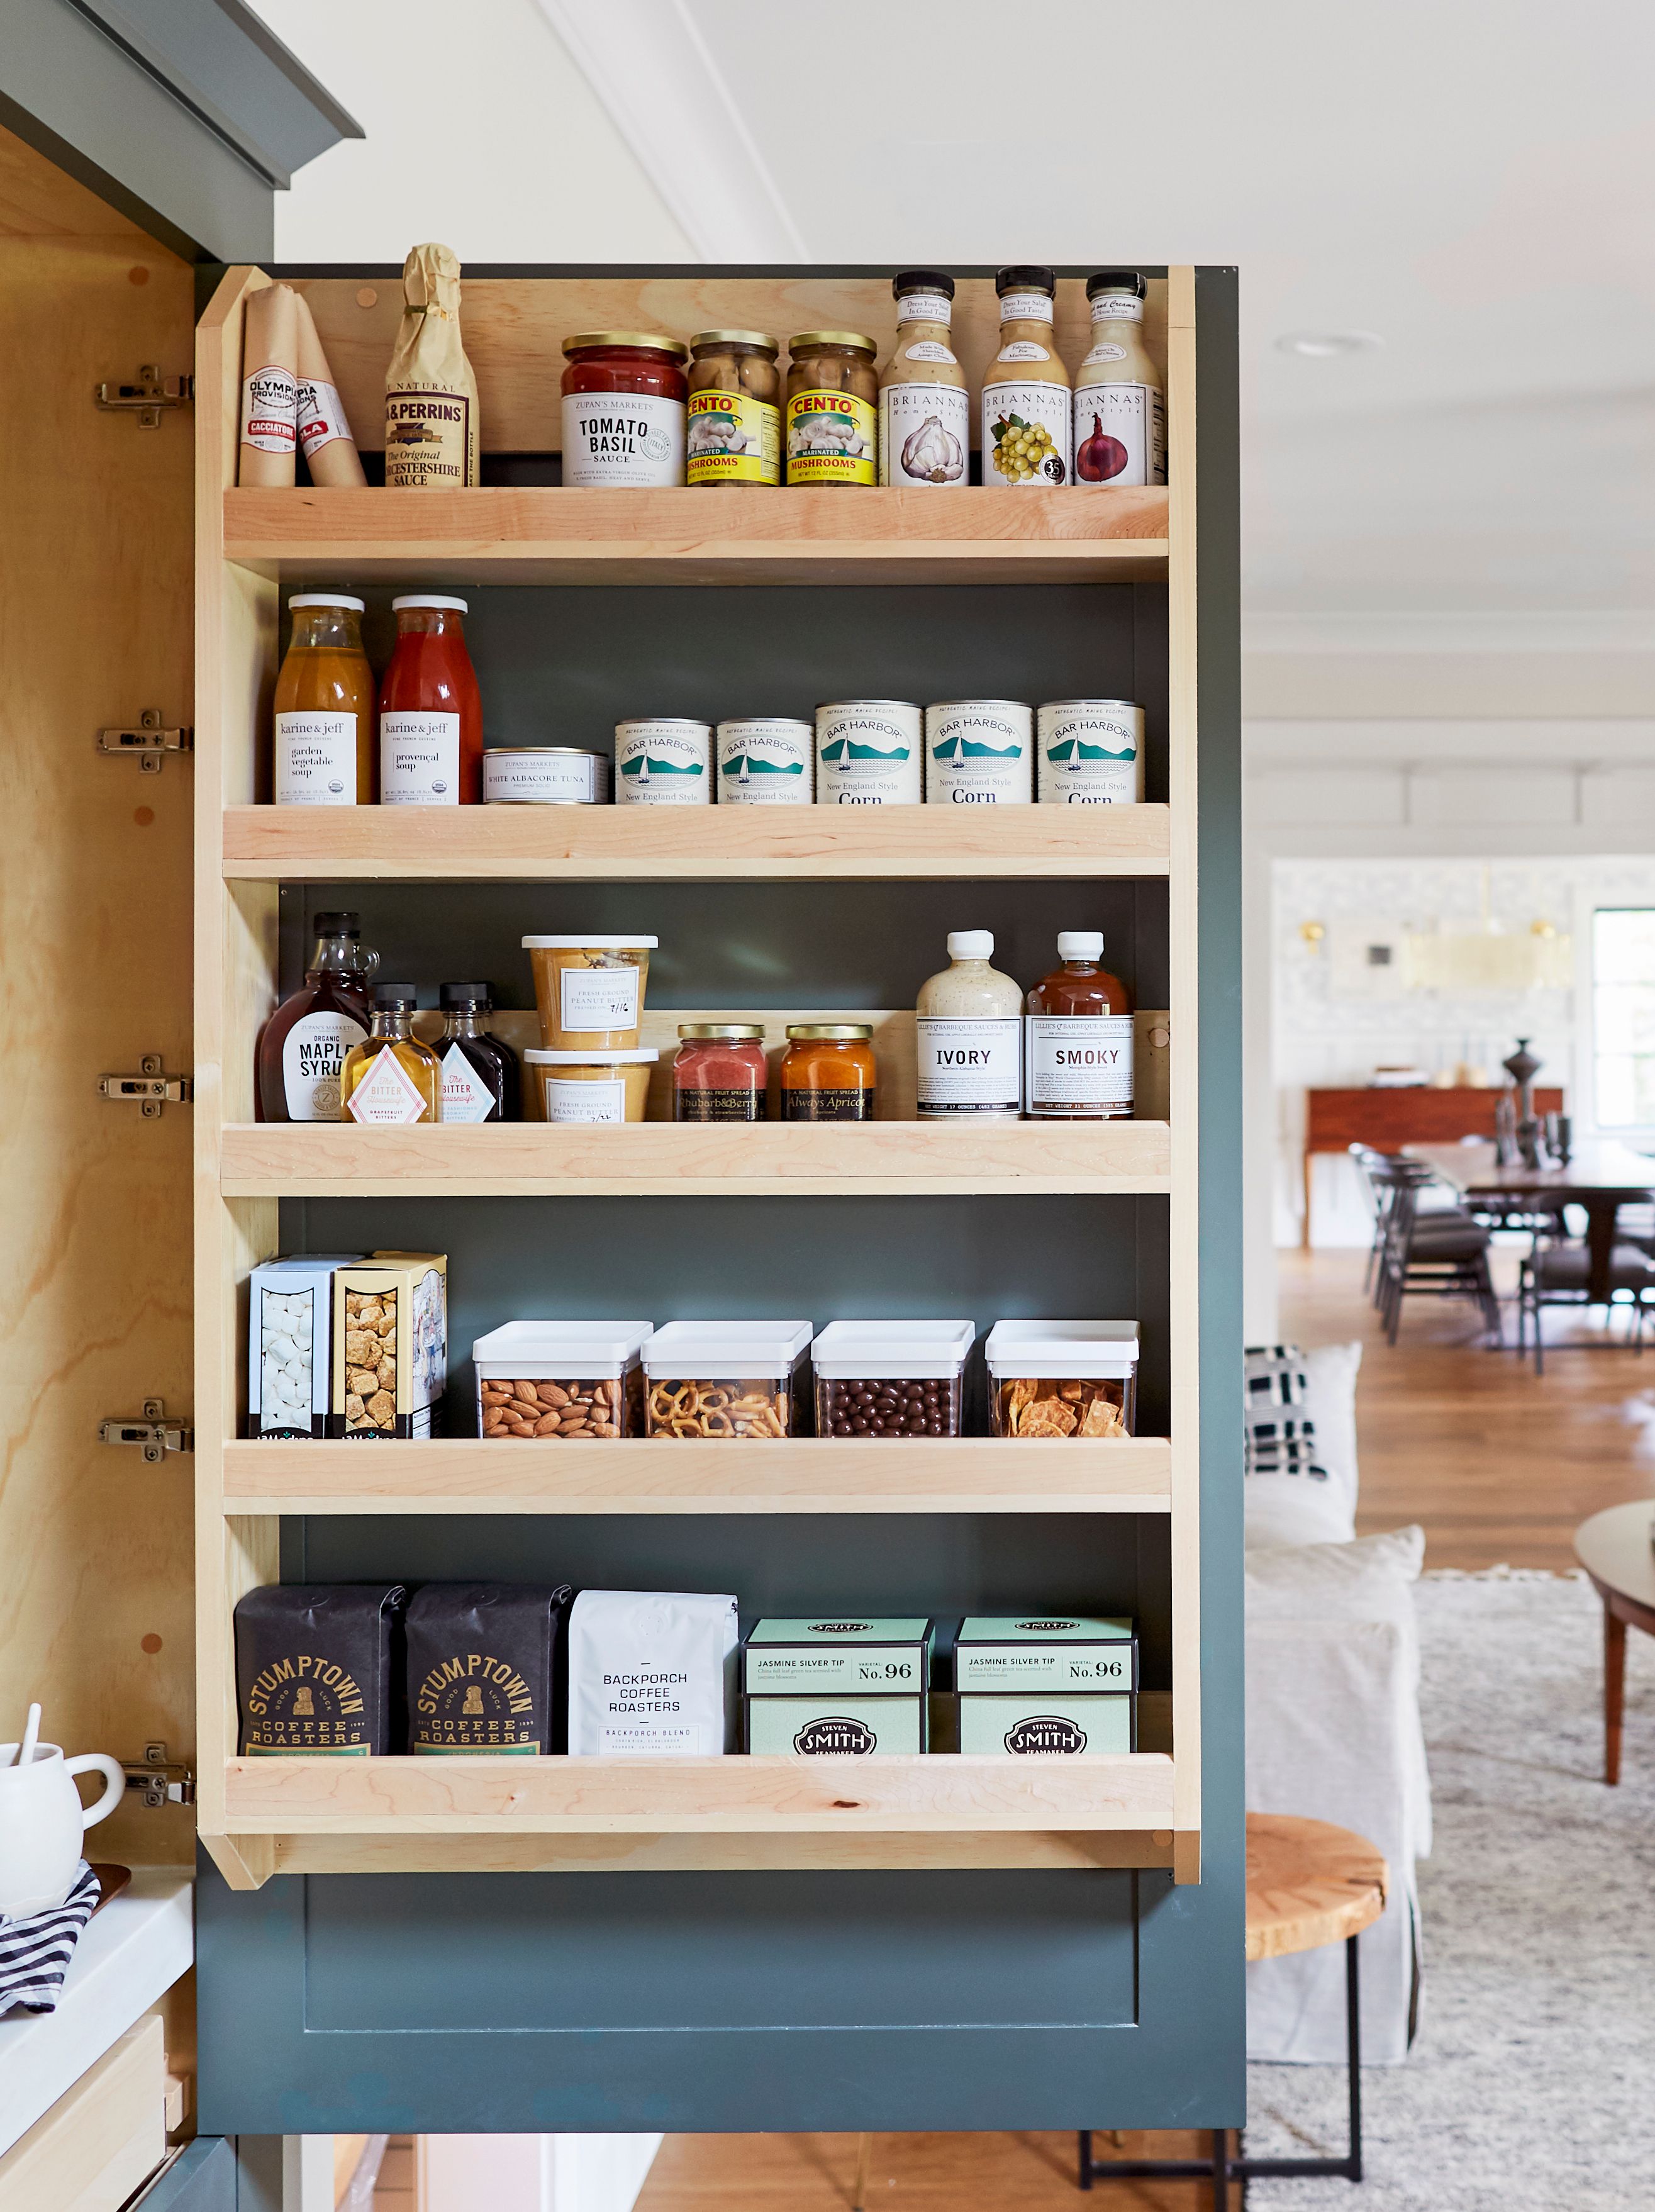 How to Organize Your Pantry - The Bettered Blondie